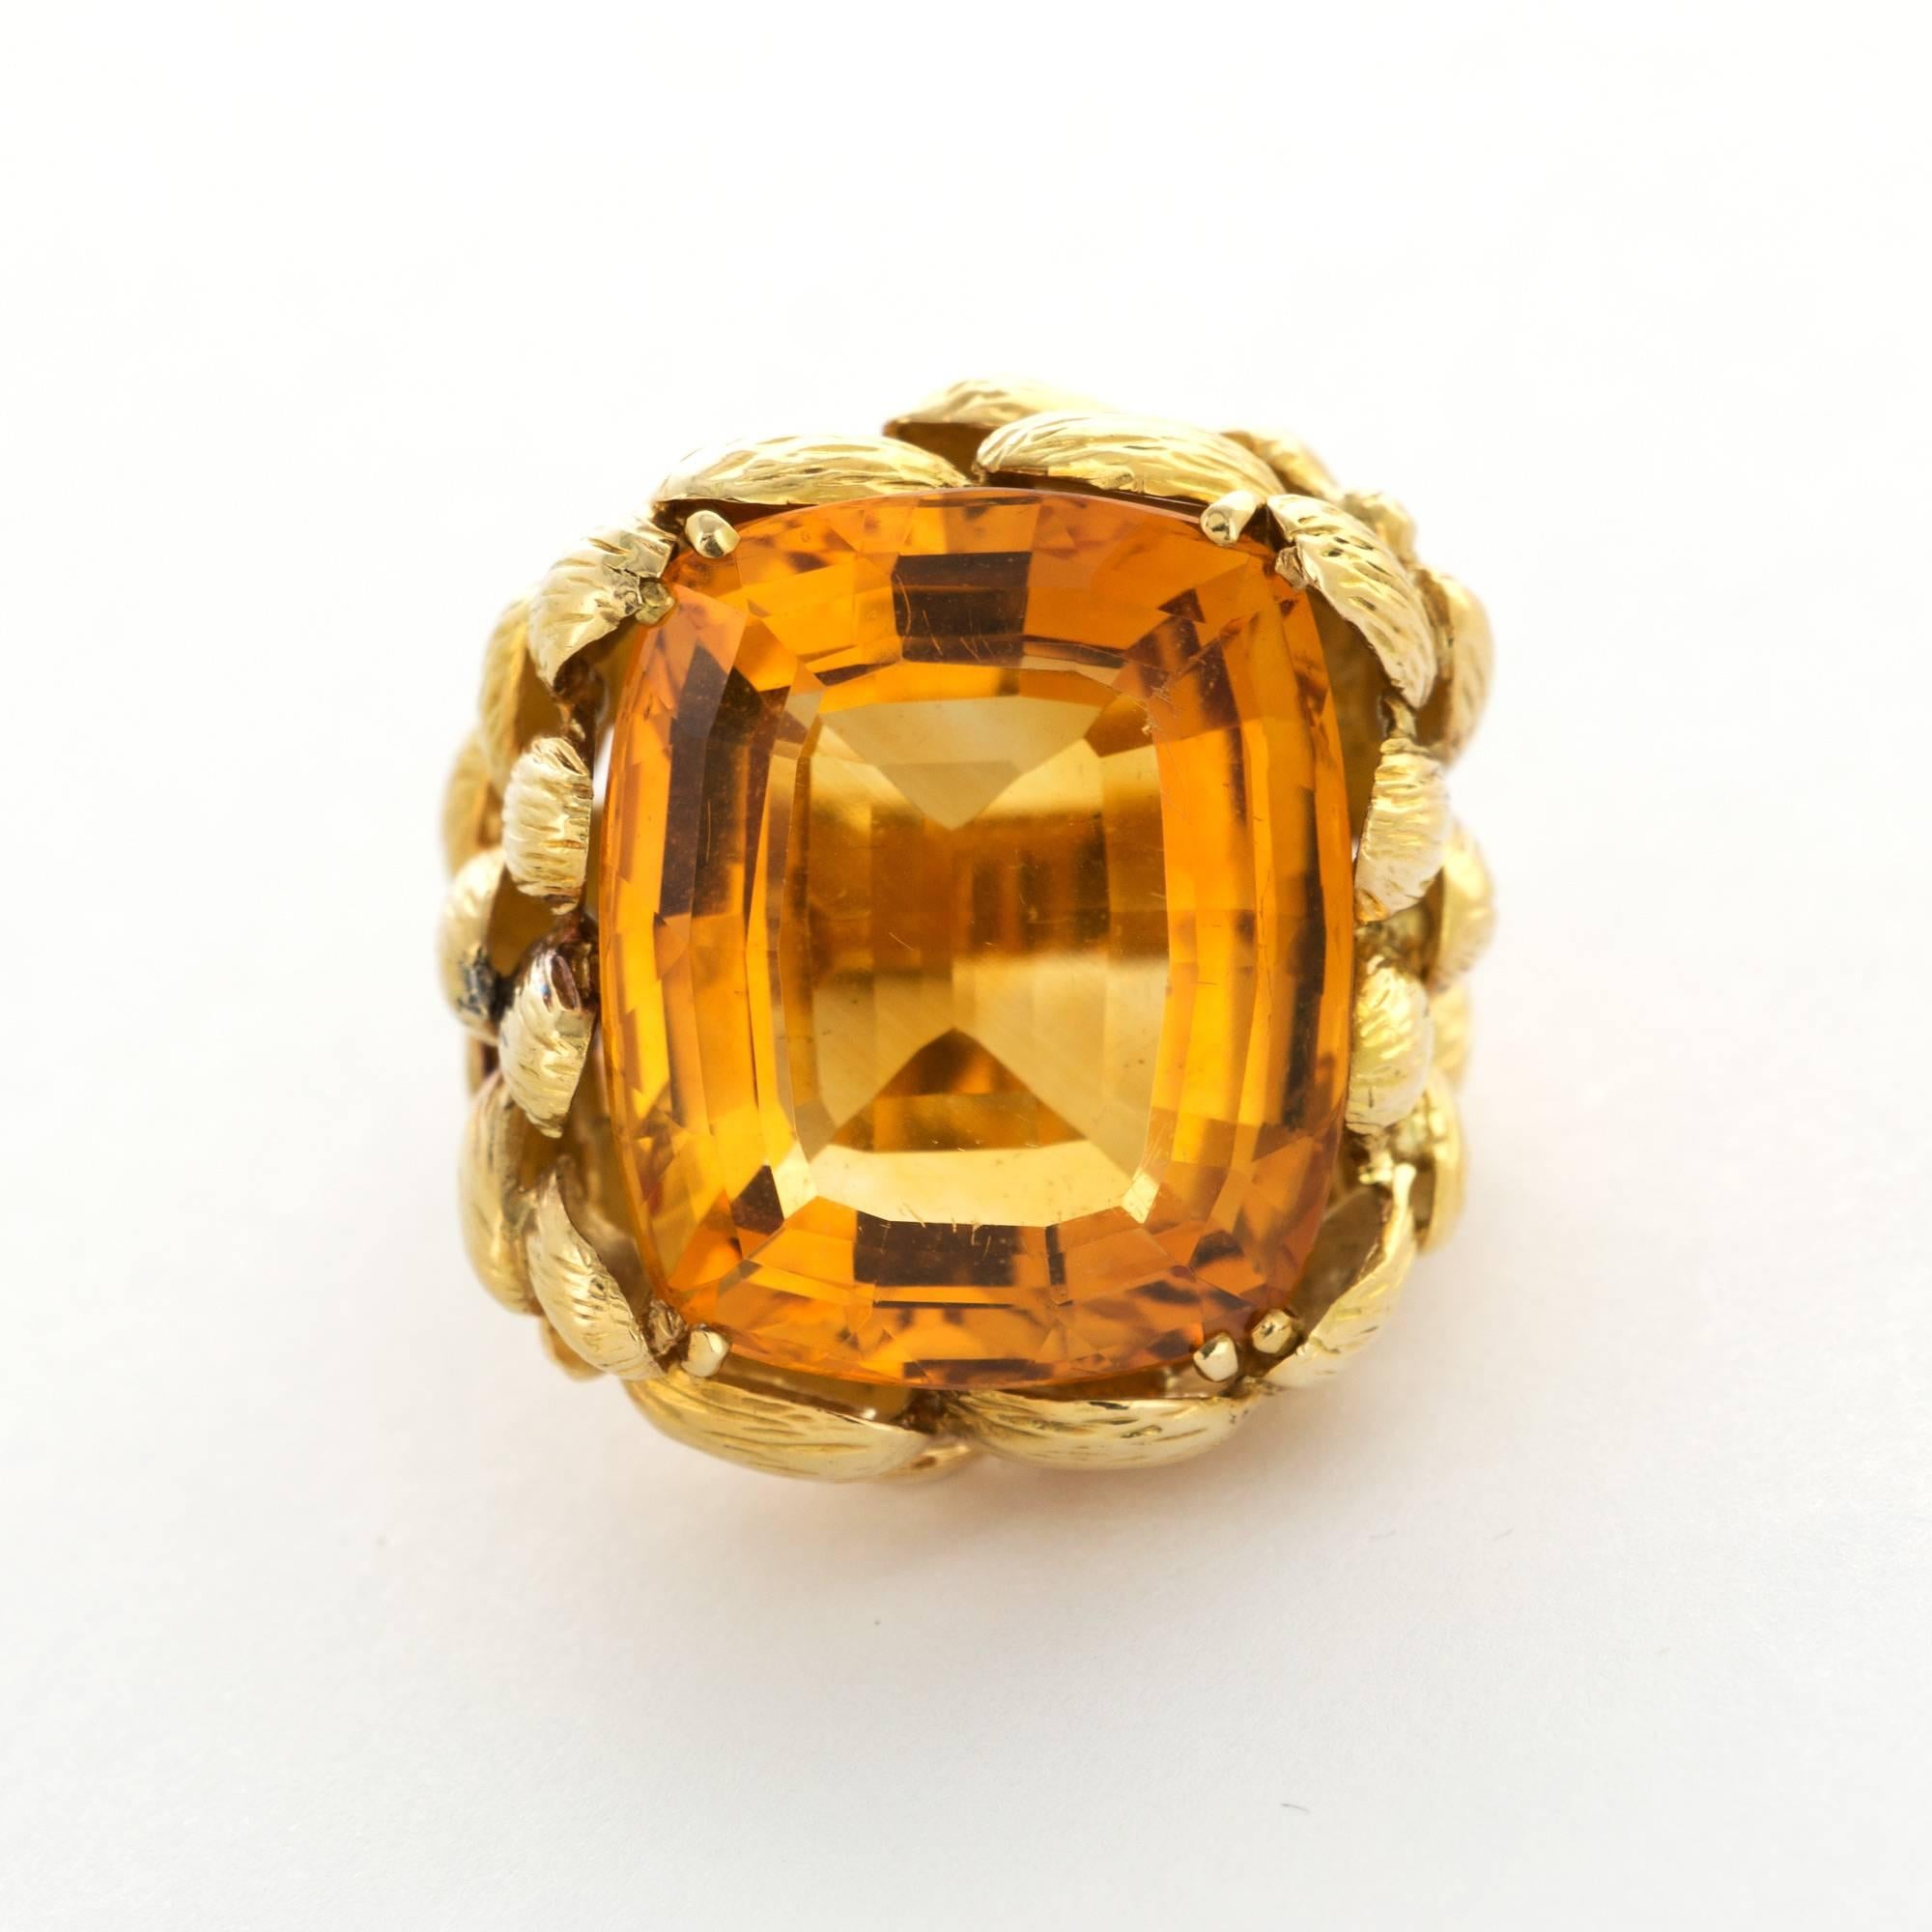 A Wonderful 18k Yellow Gold Large Citrine Ring by Chaumet. Made in Paris circa 1970. Size 5. Can be resized upon request. 